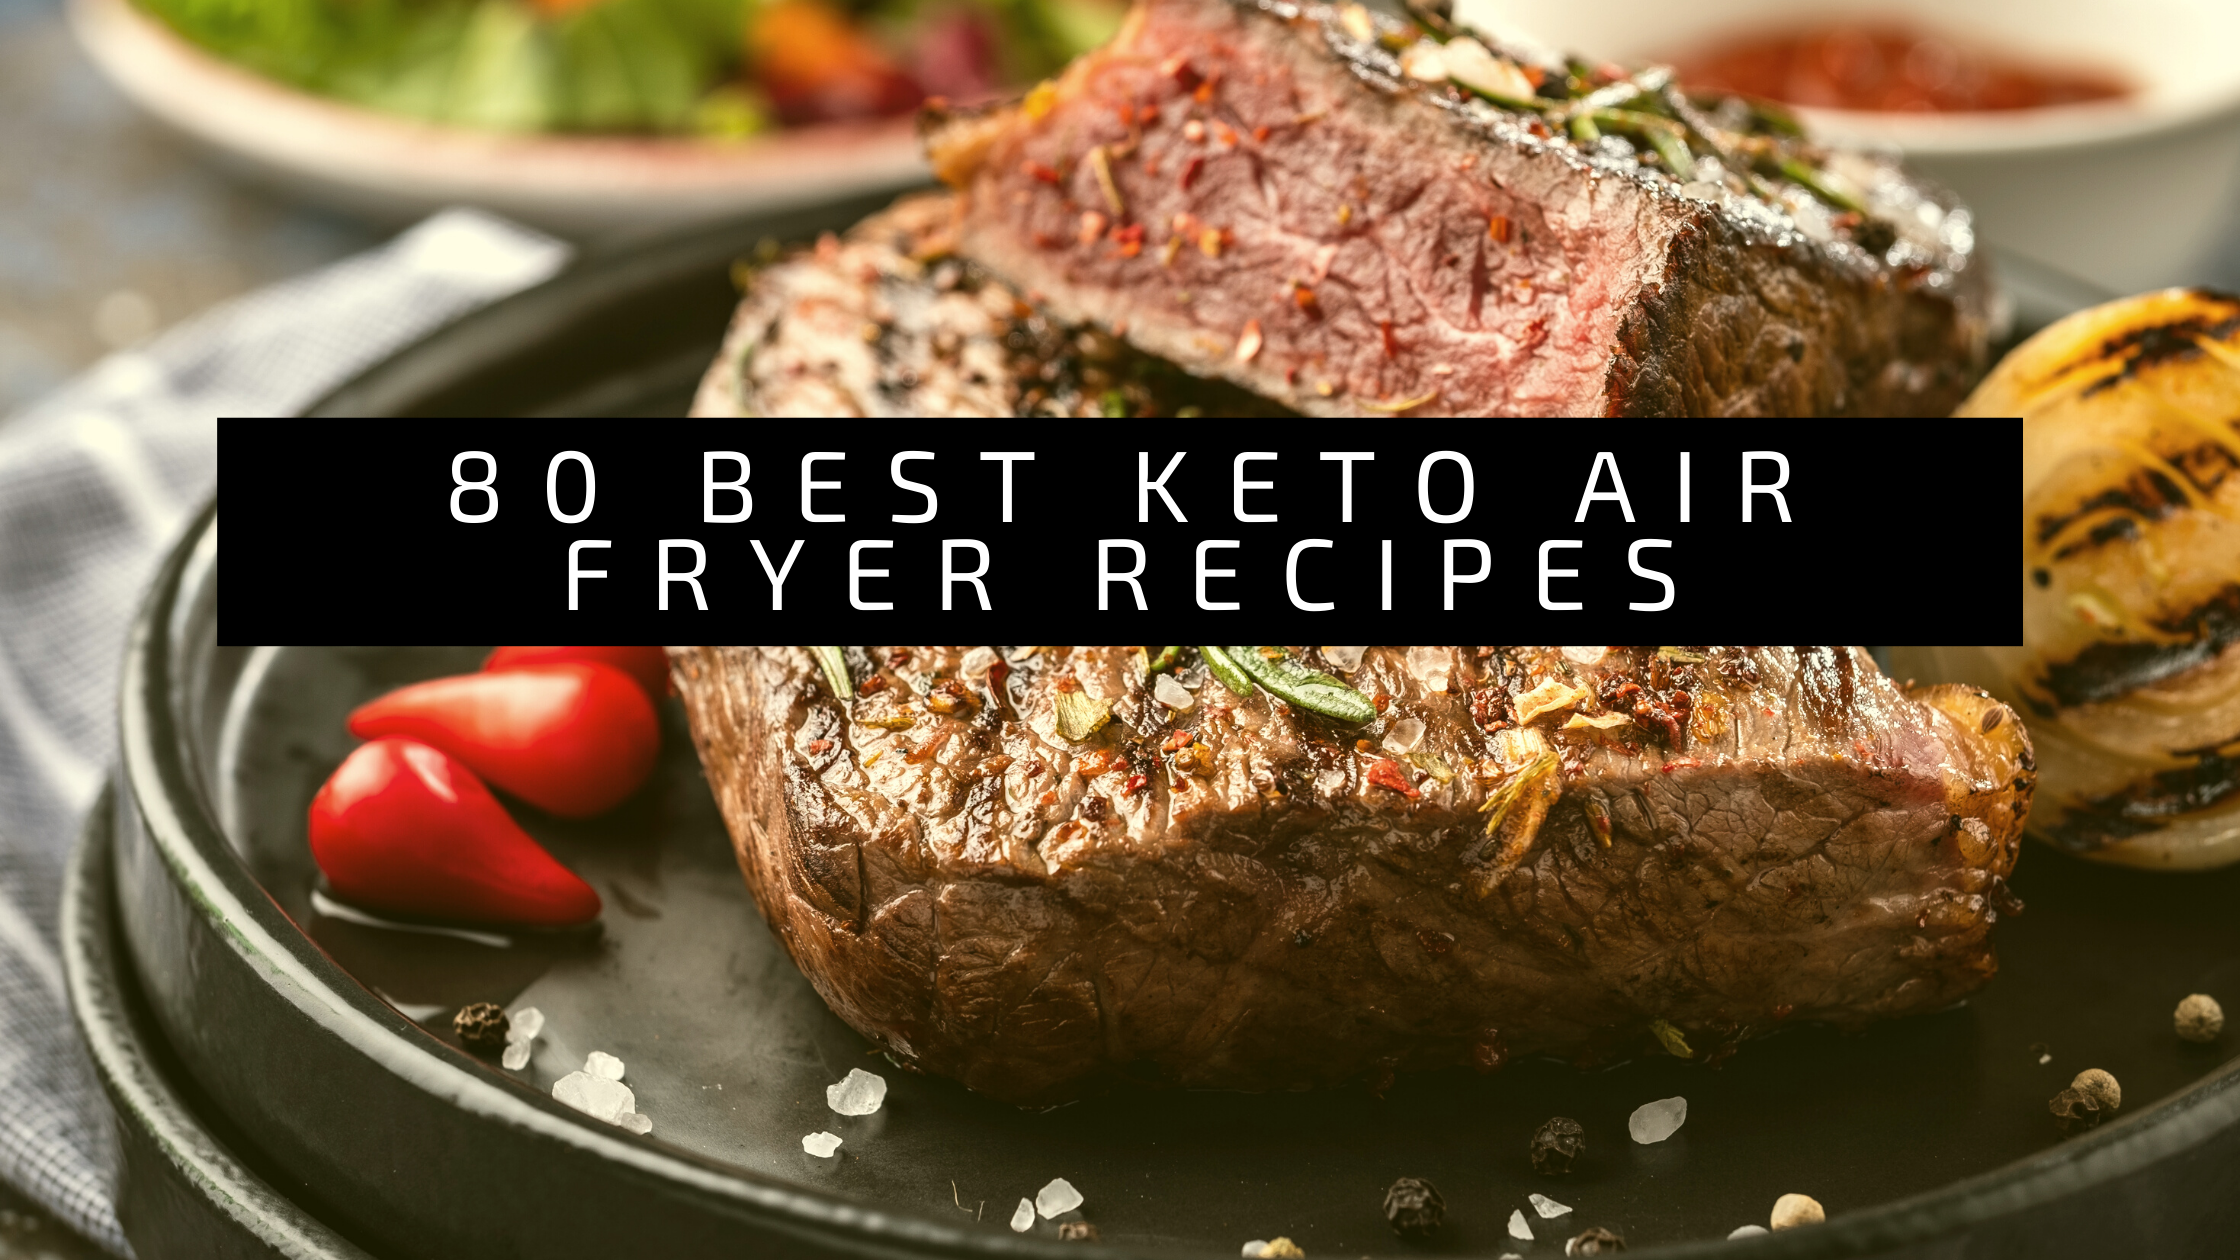 40 Family-Friendly Keto Air Fryer Recipes for Quick and Delicious Meals 6